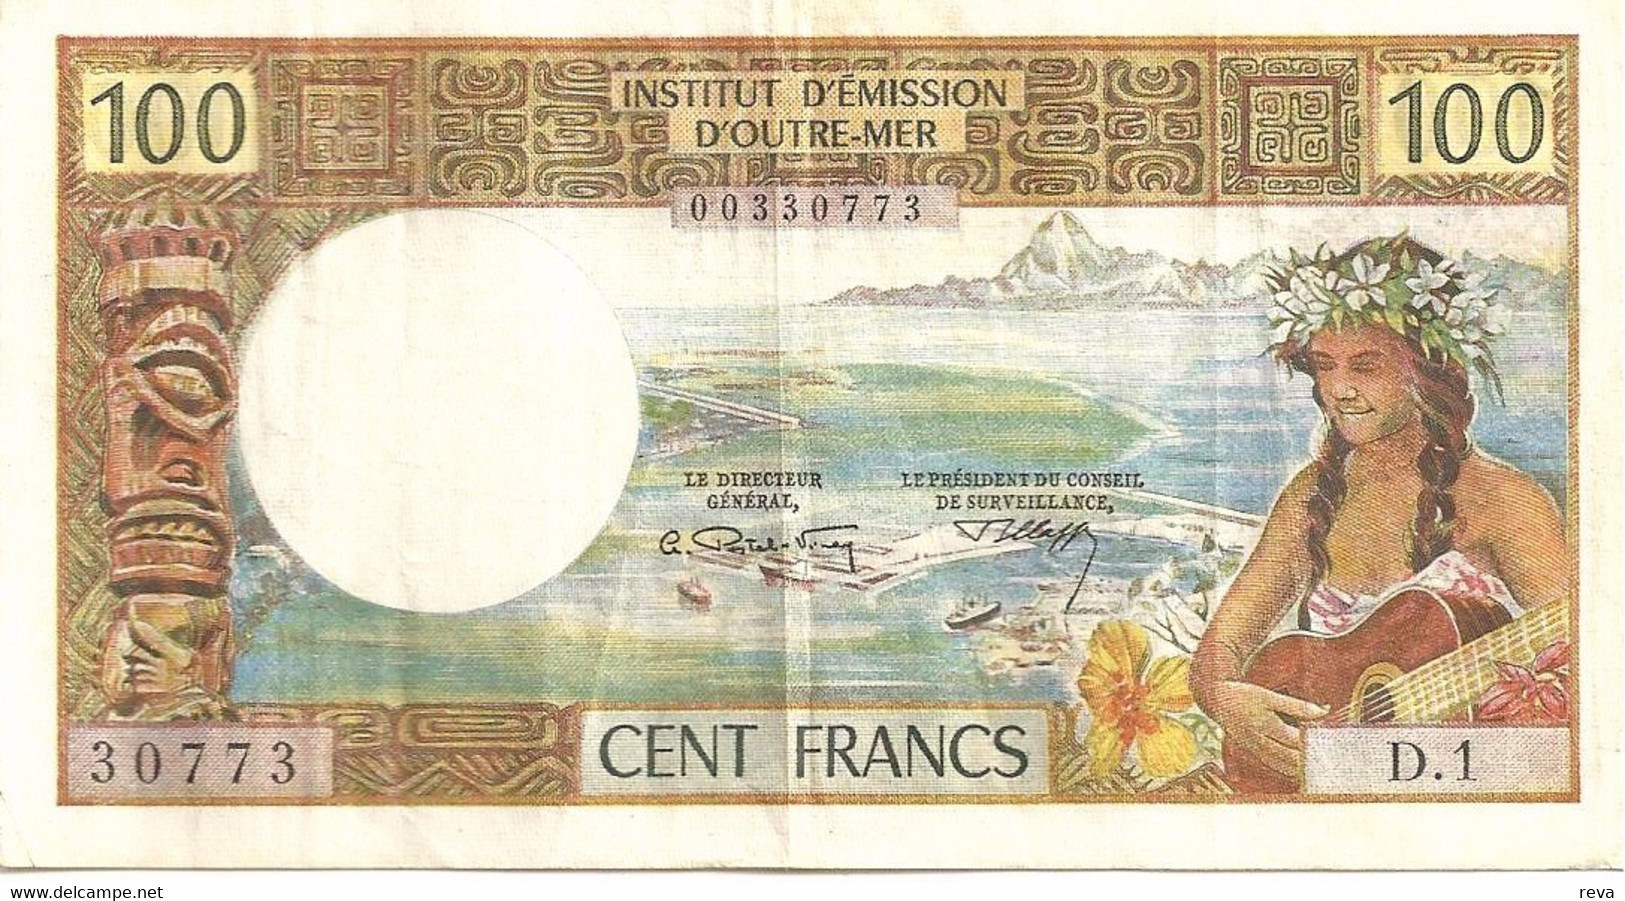 FRENCH POLYNESIA 100 FRANCS BROWN WOMAN FRONT WOMAN HEAD BACK NOT DATED(1971) P24b SIG VARIETY F READ DESCRIPTION!! - Papeete (Französisch-Polynesien 1914-1985)